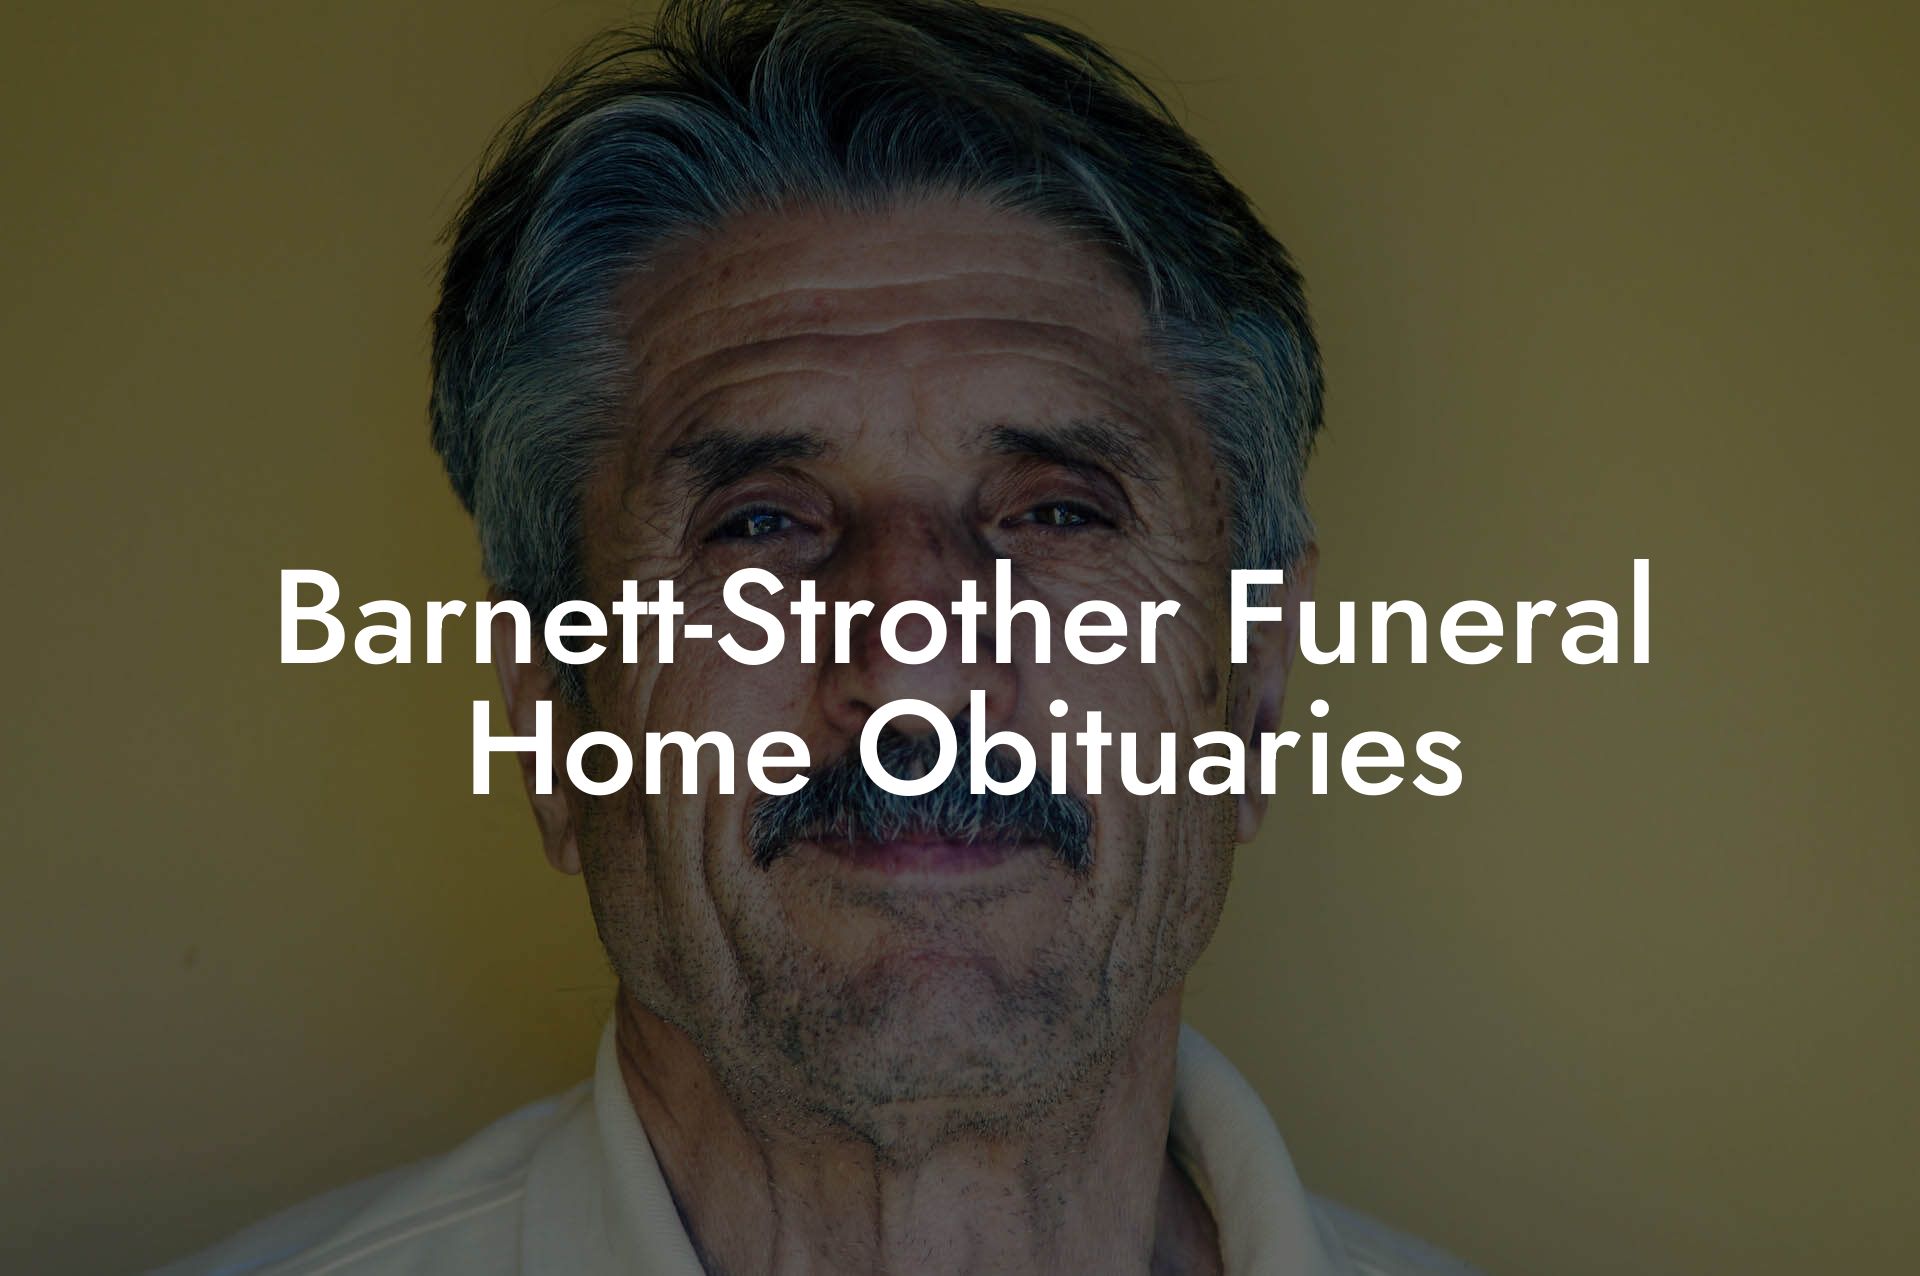 Barnett-Strother Funeral Home Obituaries